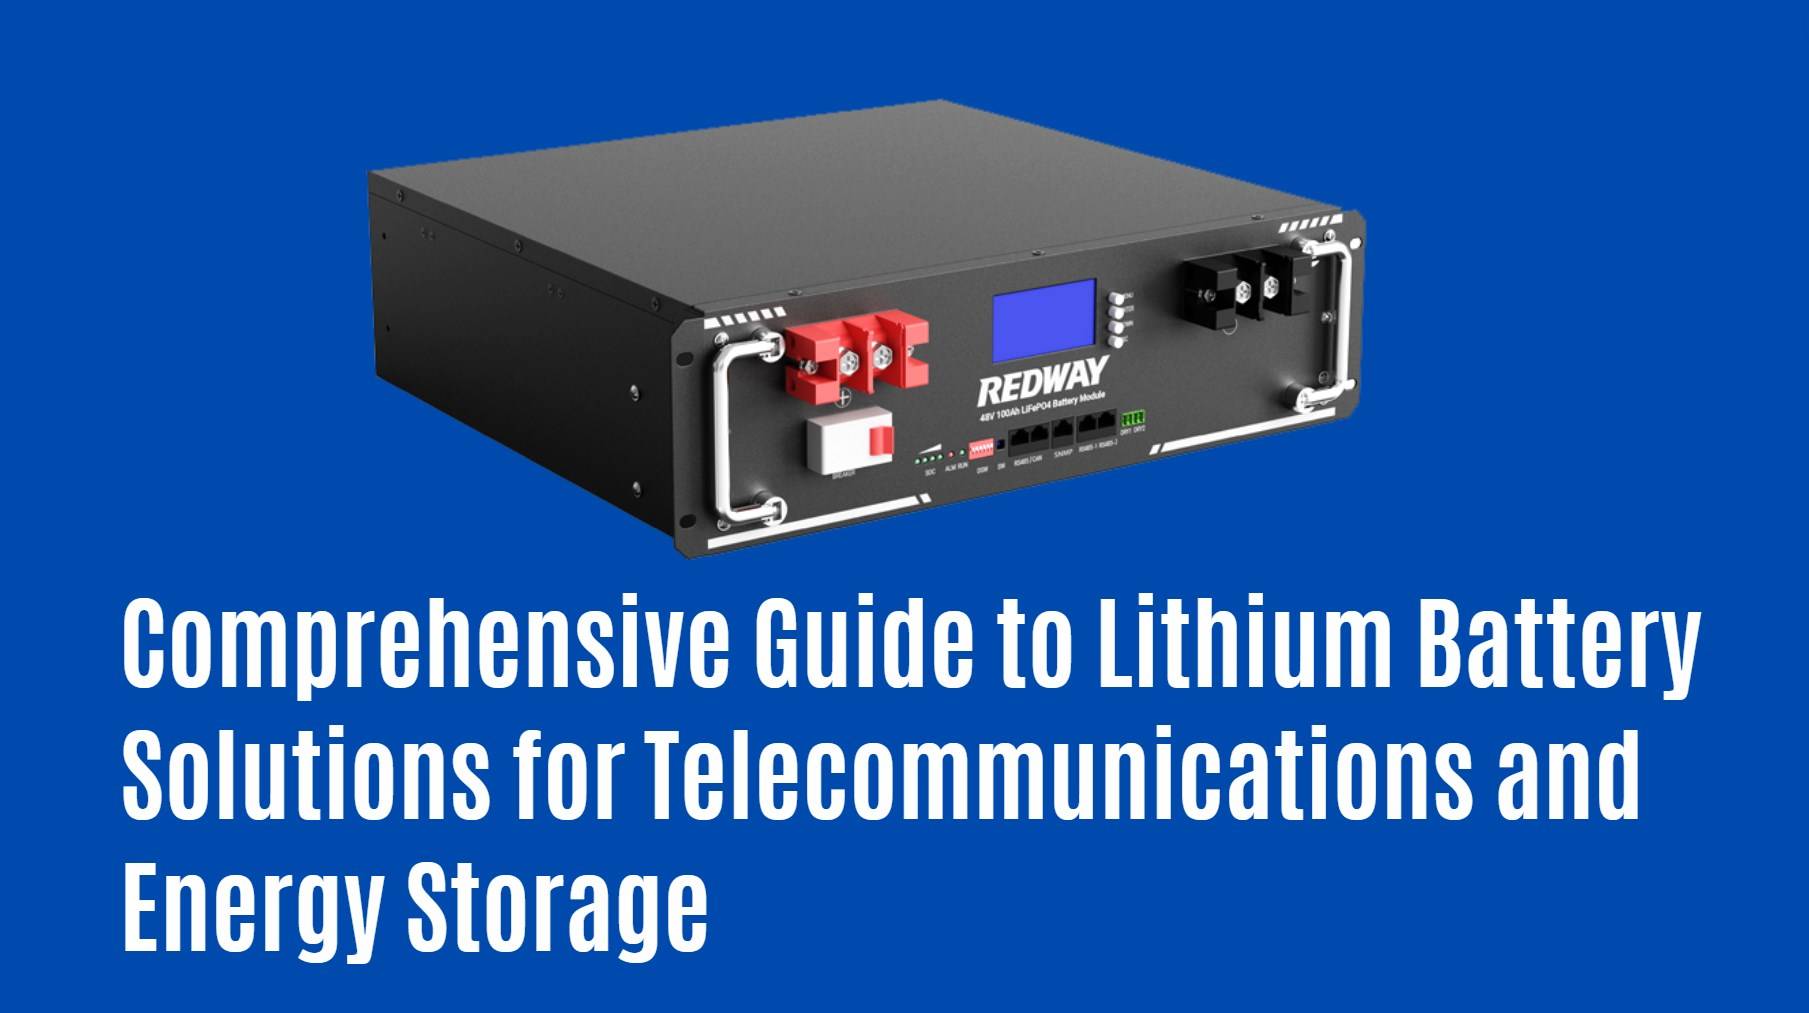 Comprehensive Guide to Lithium Battery Solutions for Telecommunications and Energy Storage